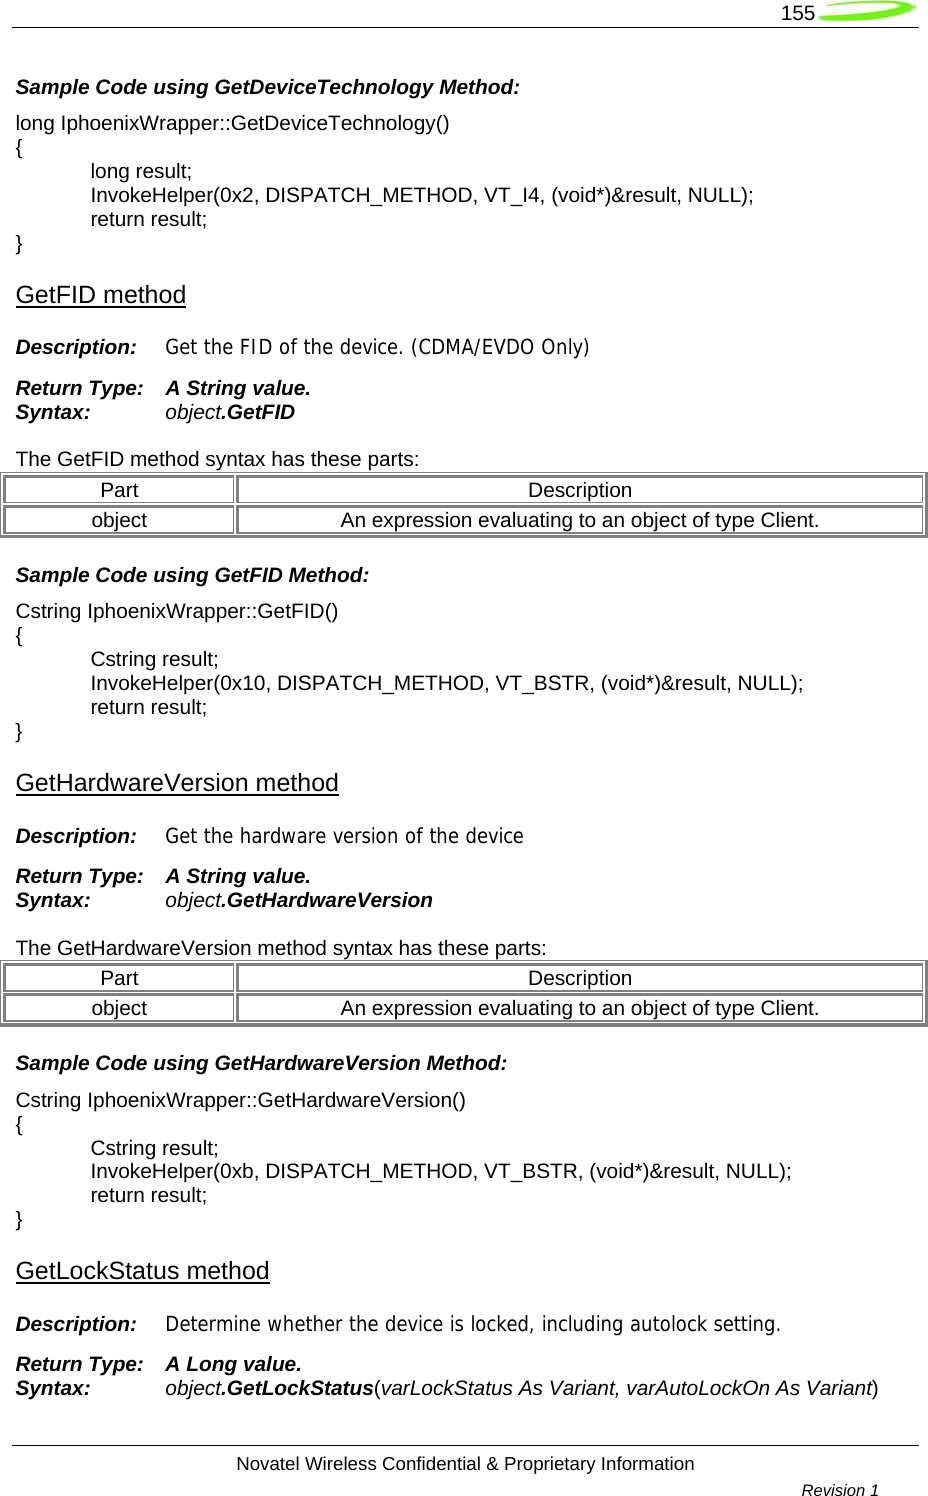   155  Novatel Wireless Confidential &amp; Proprietary Information        Revision 1   Sample Code using GetDeviceTechnology Method: long IphoenixWrapper::GetDeviceTechnology() {  long result;  InvokeHelper(0x2, DISPATCH_METHOD, VT_I4, (void*)&amp;result, NULL);  return result; } GetFID method Description:  Get the FID of the device. (CDMA/EVDO Only) Return Type:  A String value. Syntax:  object.GetFID  The GetFID method syntax has these parts: Part Description object  An expression evaluating to an object of type Client. Sample Code using GetFID Method: Cstring IphoenixWrapper::GetFID() {  Cstring result;  InvokeHelper(0x10, DISPATCH_METHOD, VT_BSTR, (void*)&amp;result, NULL);  return result; } GetHardwareVersion method Description:  Get the hardware version of the device Return Type:  A String value. Syntax:  object.GetHardwareVersion  The GetHardwareVersion method syntax has these parts: Part Description object  An expression evaluating to an object of type Client. Sample Code using GetHardwareVersion Method: Cstring IphoenixWrapper::GetHardwareVersion() {  Cstring result;  InvokeHelper(0xb, DISPATCH_METHOD, VT_BSTR, (void*)&amp;result, NULL);  return result; } GetLockStatus method Description:  Determine whether the device is locked, including autolock setting. Return Type:  A Long value. Syntax:  object.GetLockStatus(varLockStatus As Variant, varAutoLockOn As Variant)  